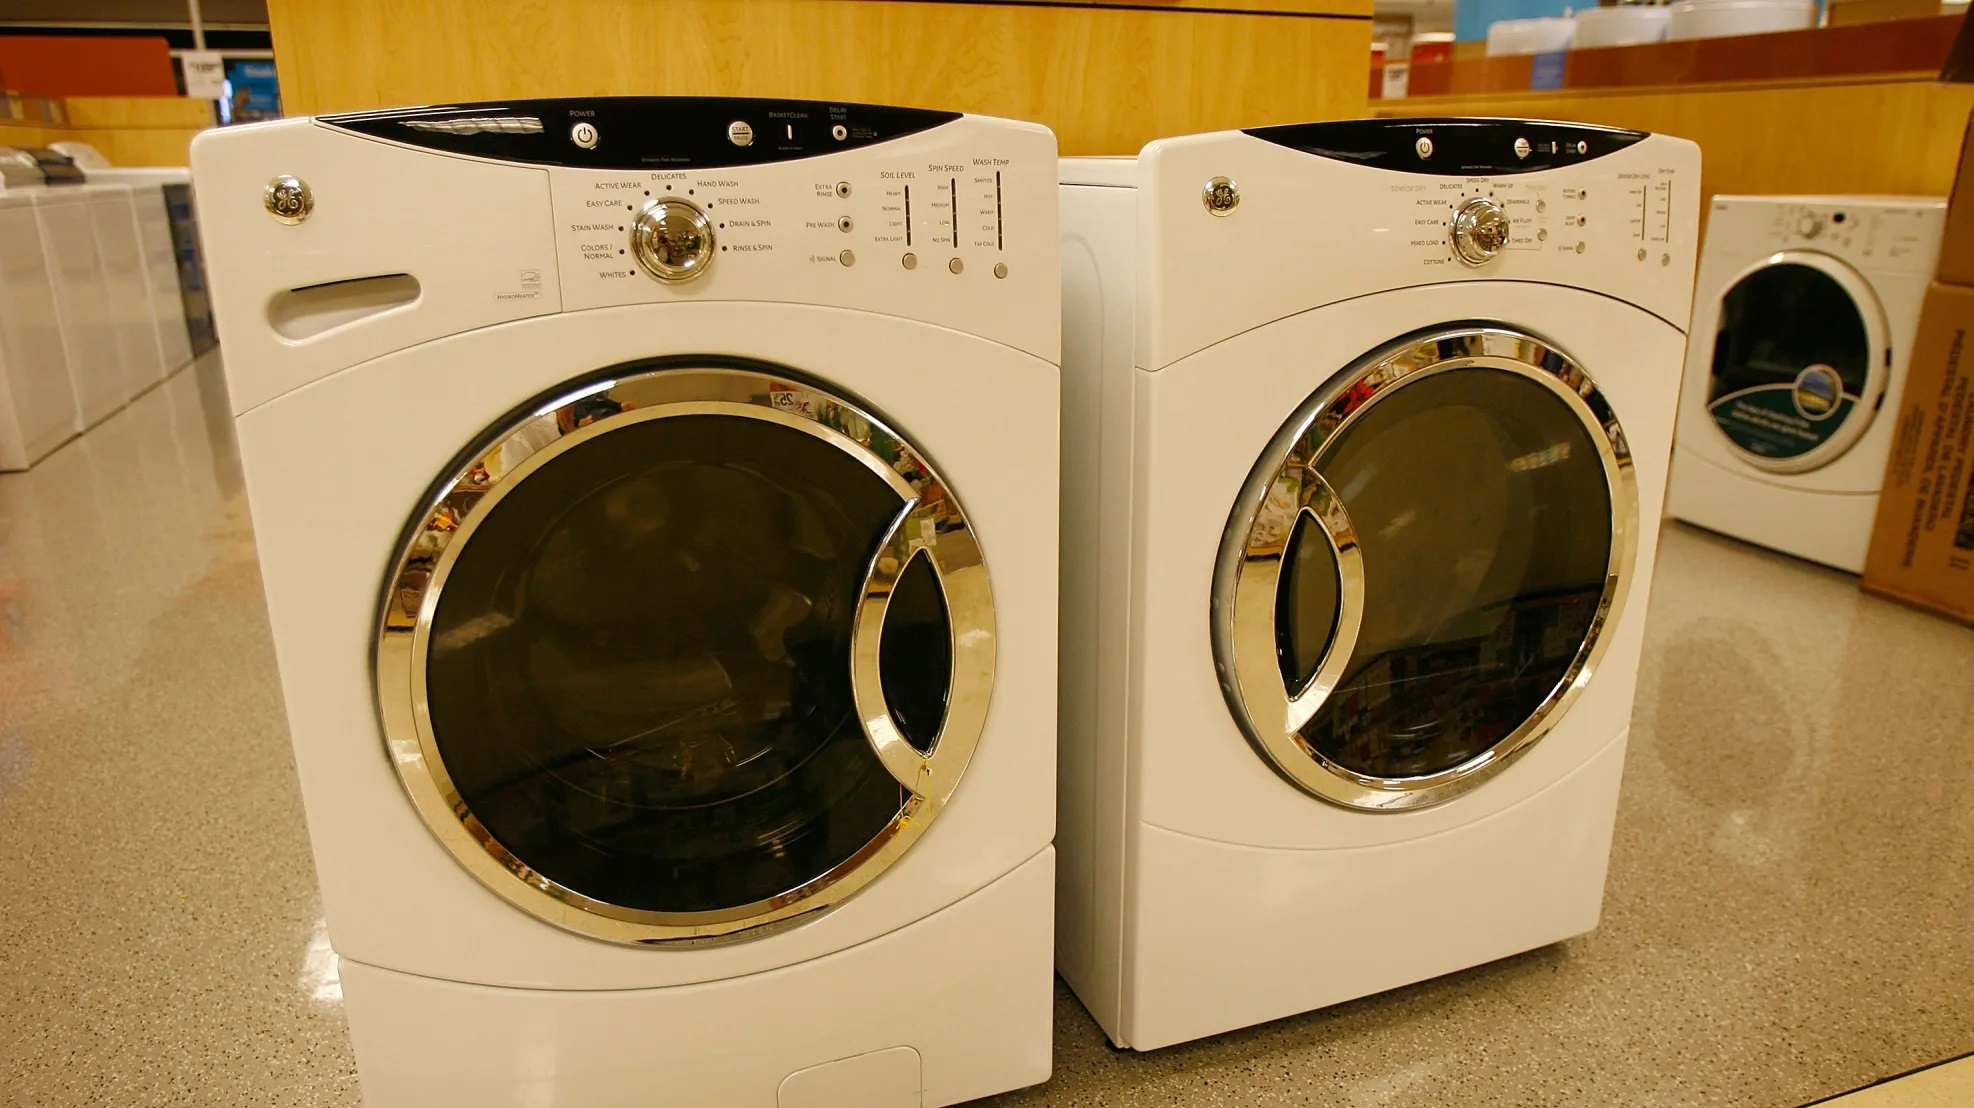 Program Offers Opportunity to Purchase Low Cost Home Appliances